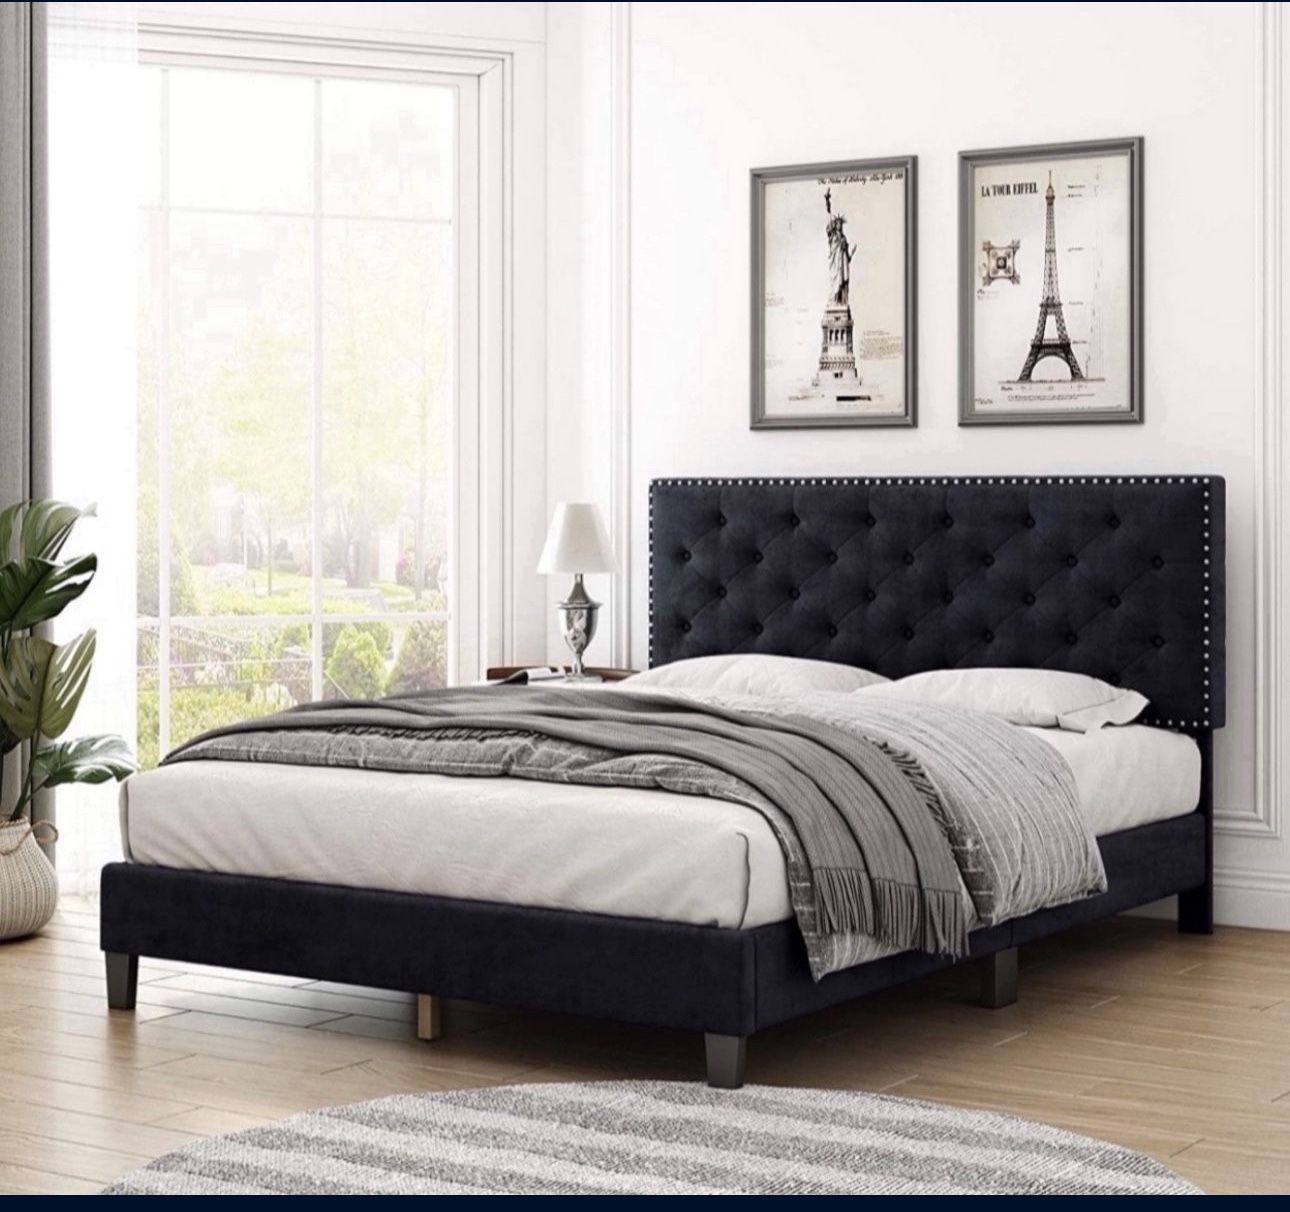 Moving - Must Sell! $400.00 - Brand New Tufted Queen Bed frame  